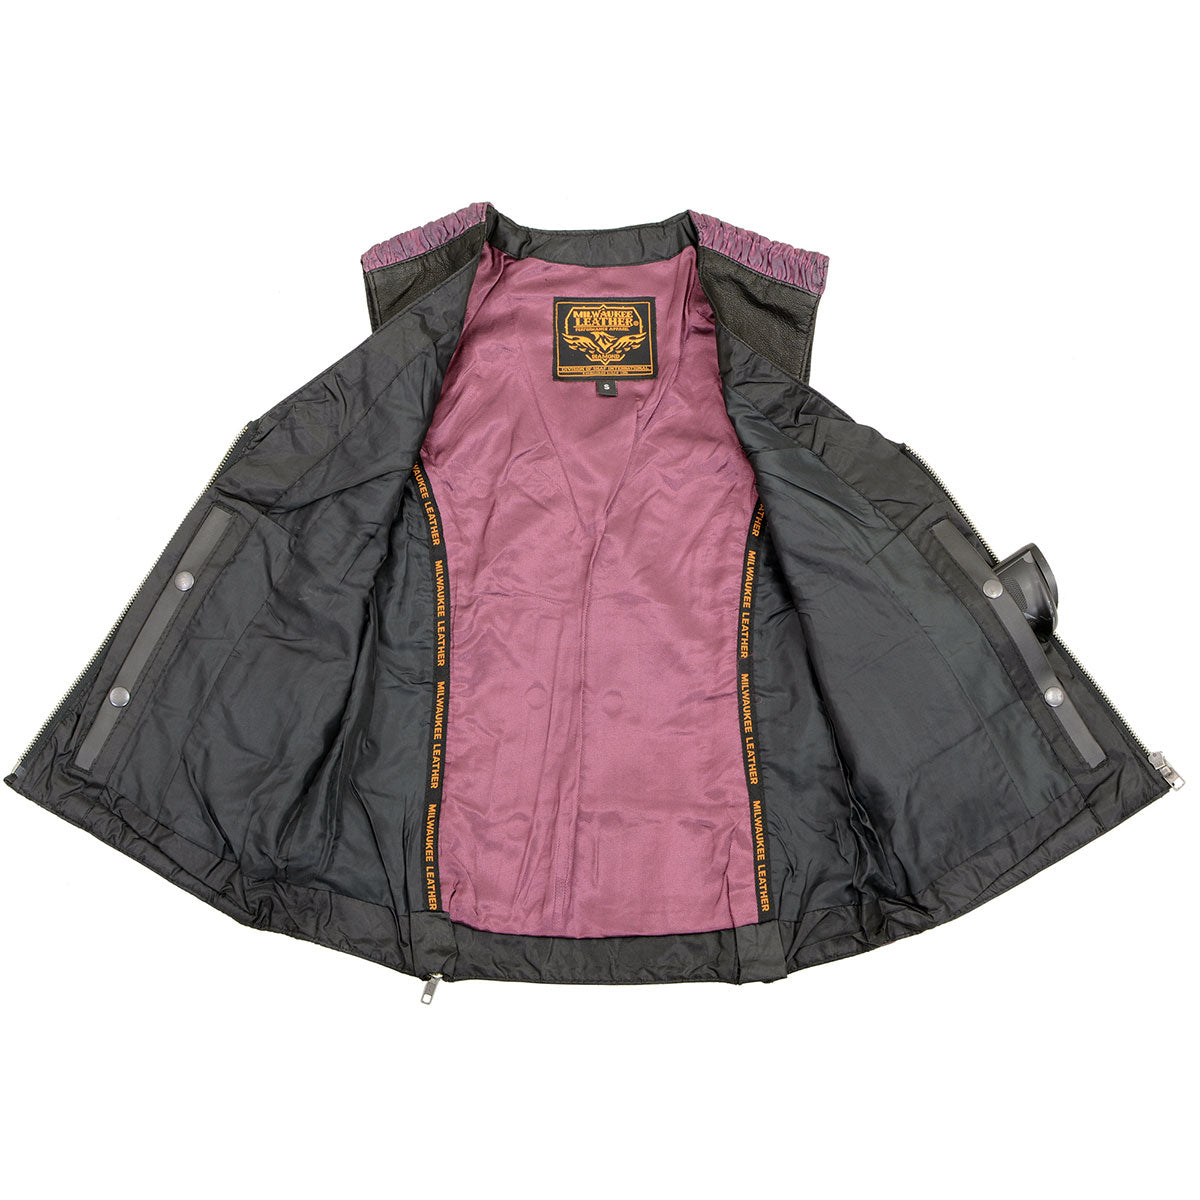 Milwaukee Leather MLL4571 Women's Black and Pink Lightweight Motorcycle Leather Vest w/ Crinkled Leather Design